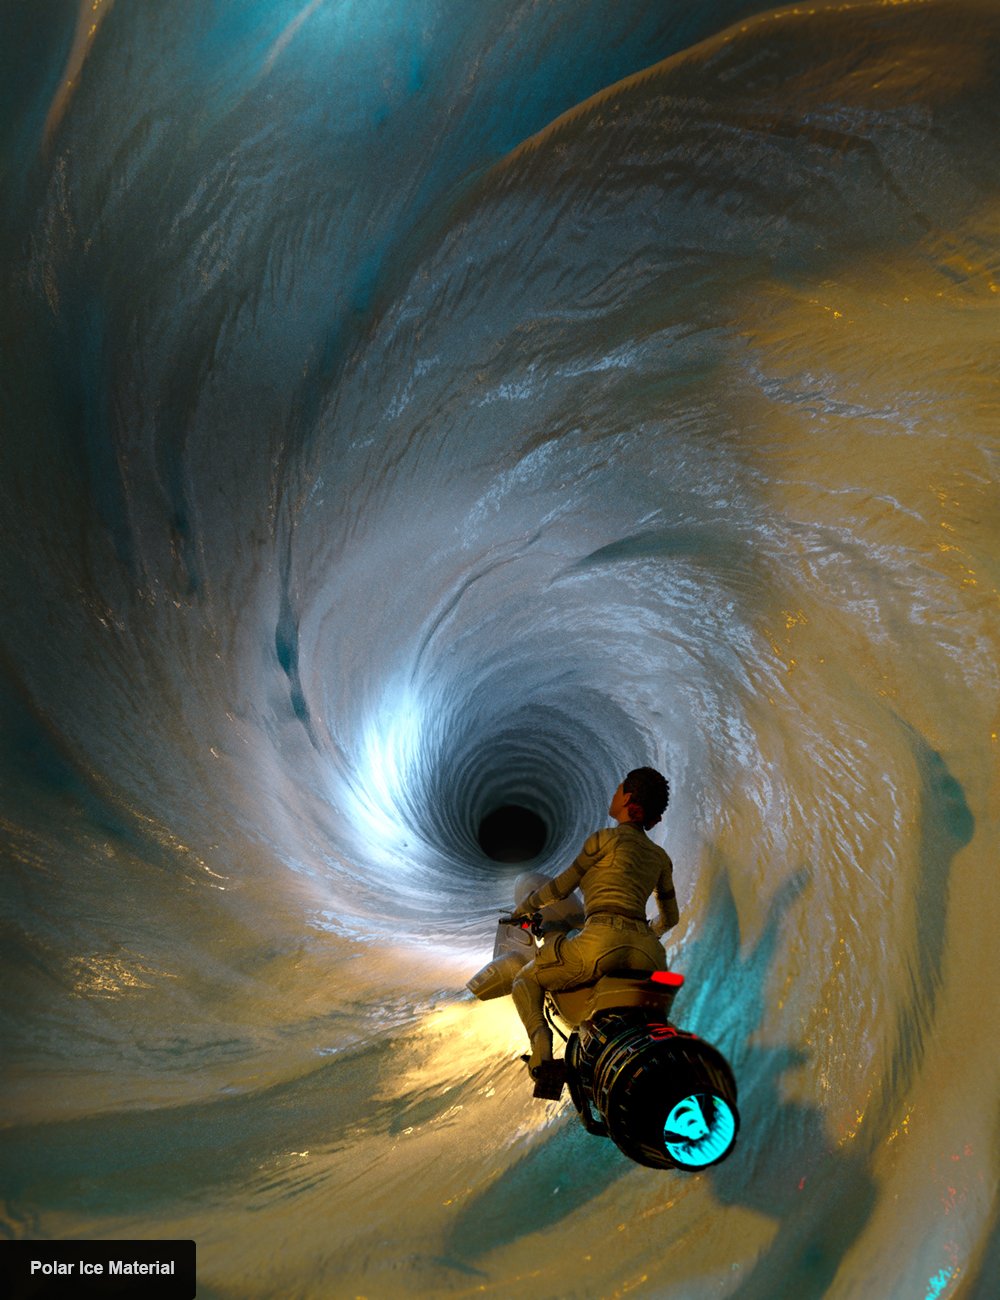 Wormhole Anomaly by: Marshian, 3D Models by Daz 3D